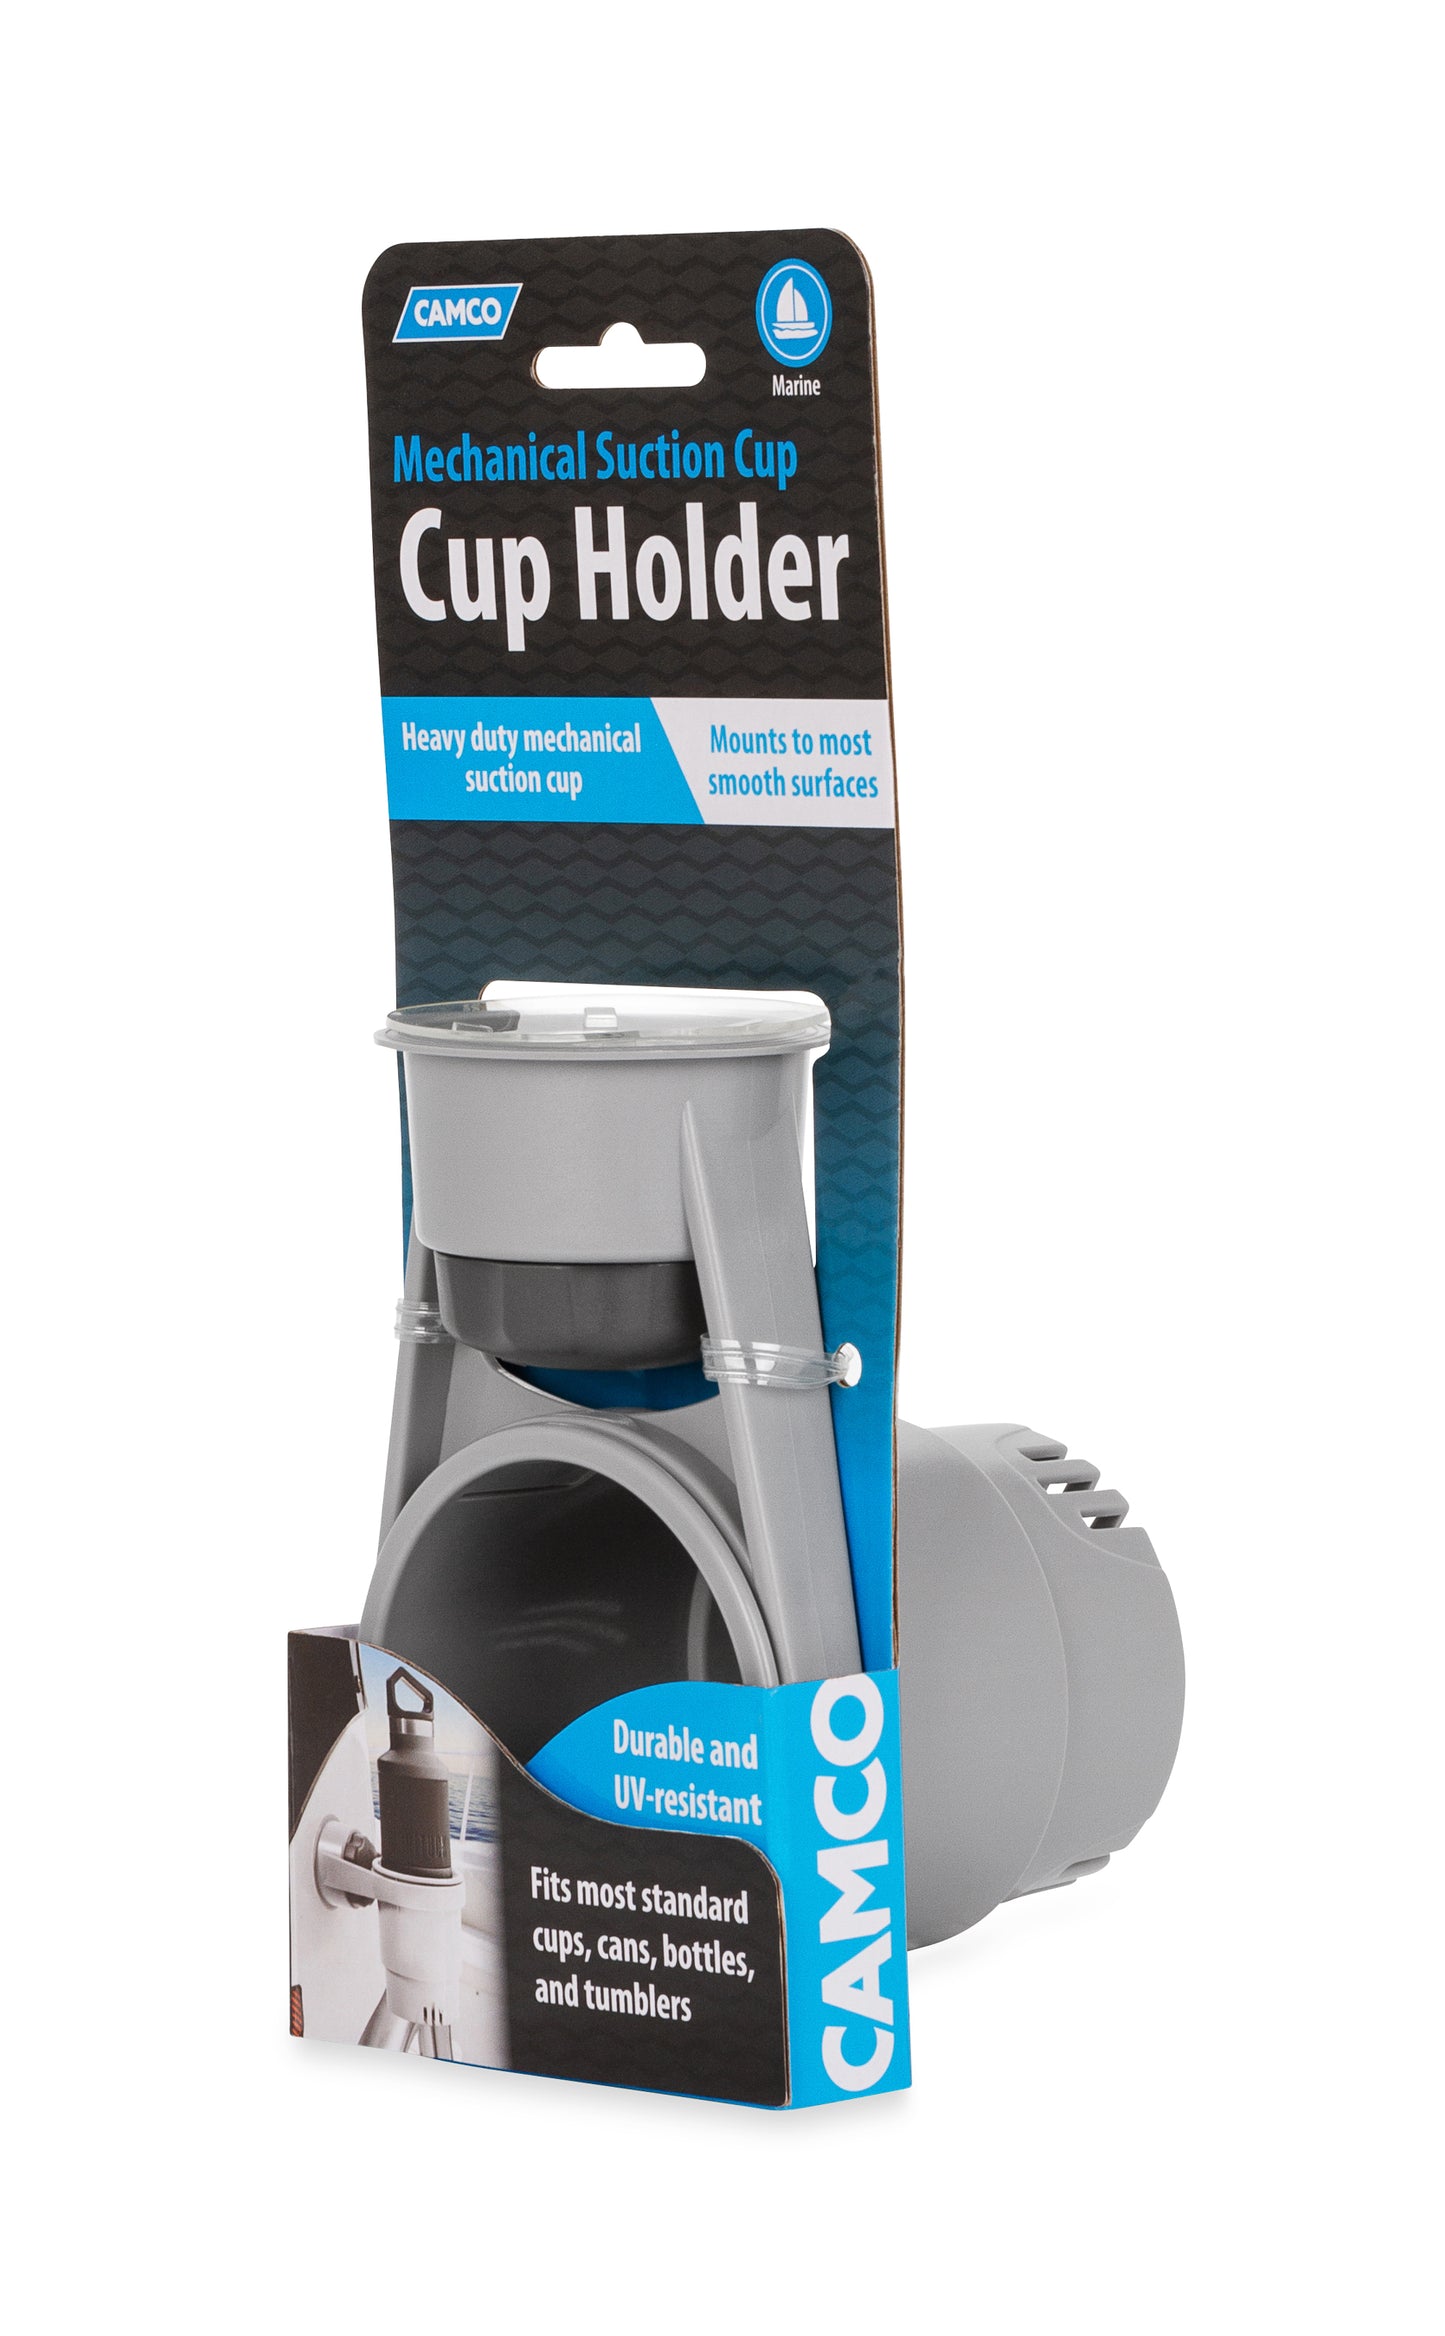 Camco Boat Cup Holder with Mechanical Suction Cup - Gray